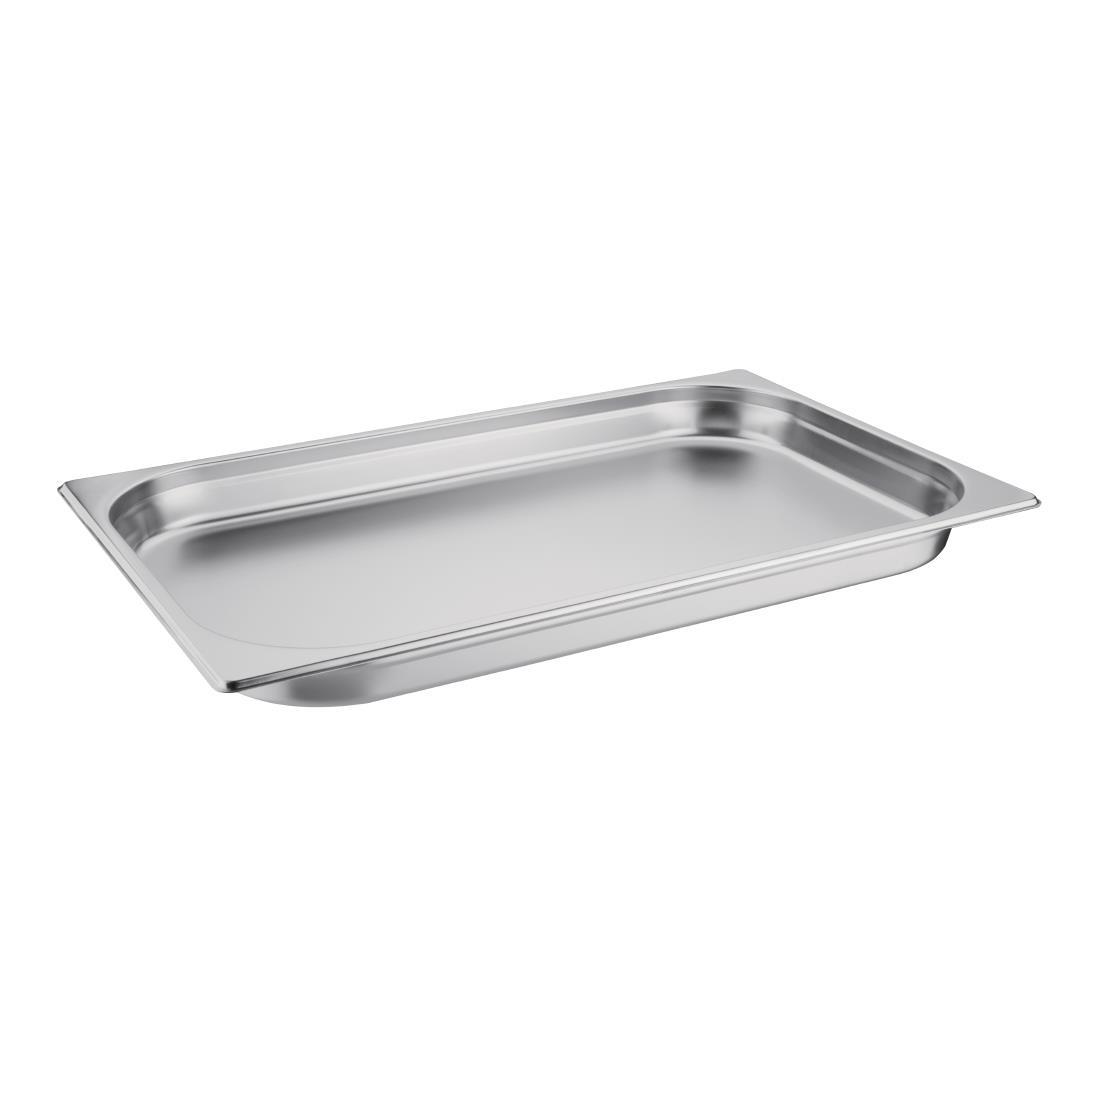 Vogue Stainless Steel 1/1 Gastronorm Pan 40mm - K994  - 1